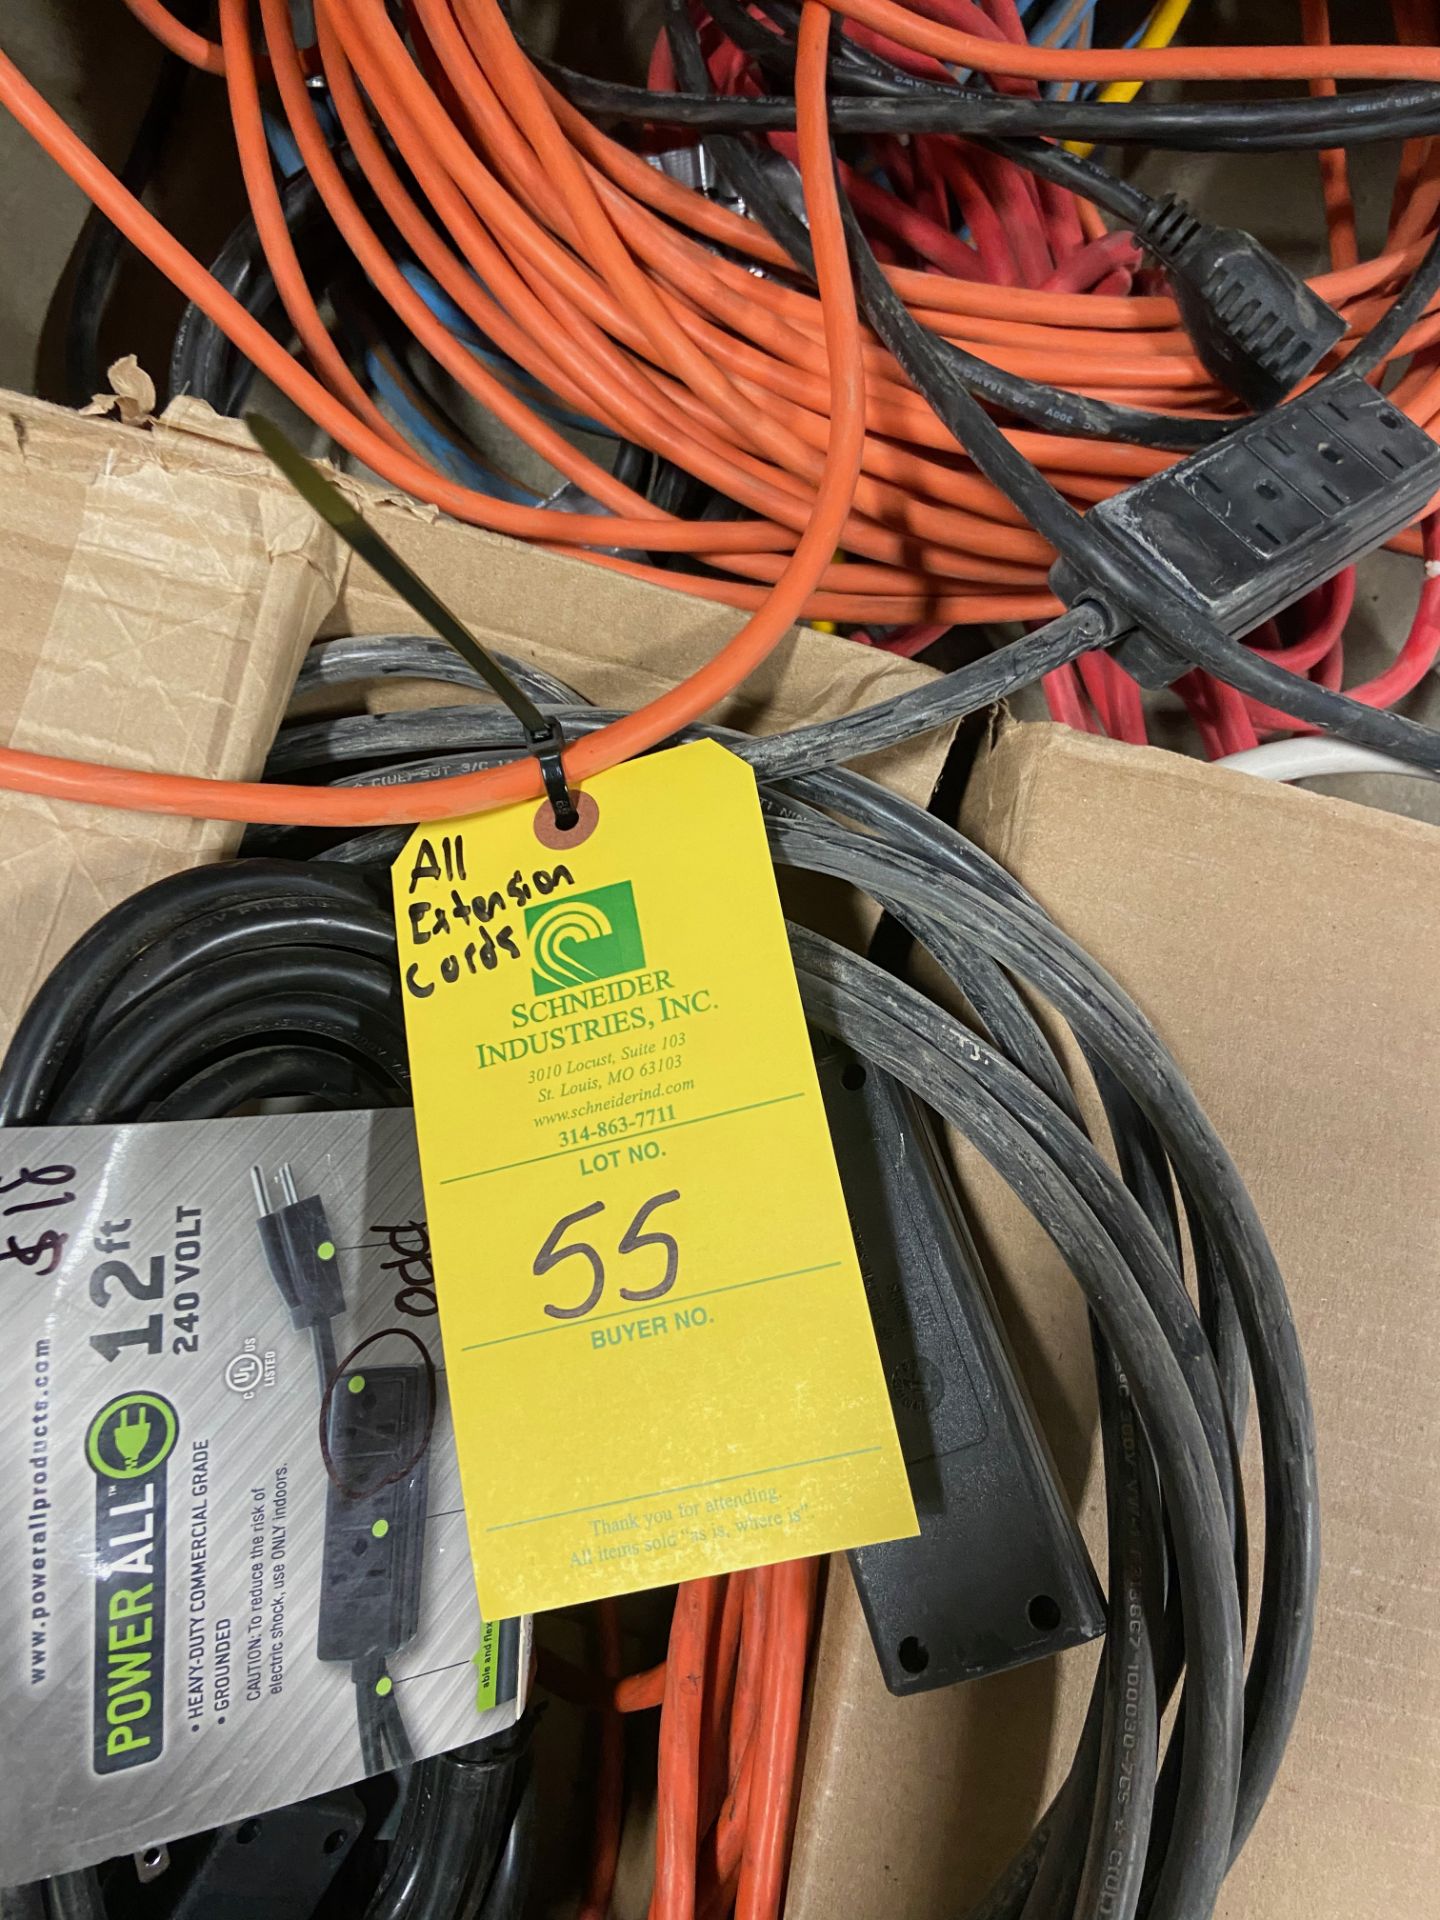 Extension Cords (All Pictured), Rigging Fee: $10 - Image 4 of 4